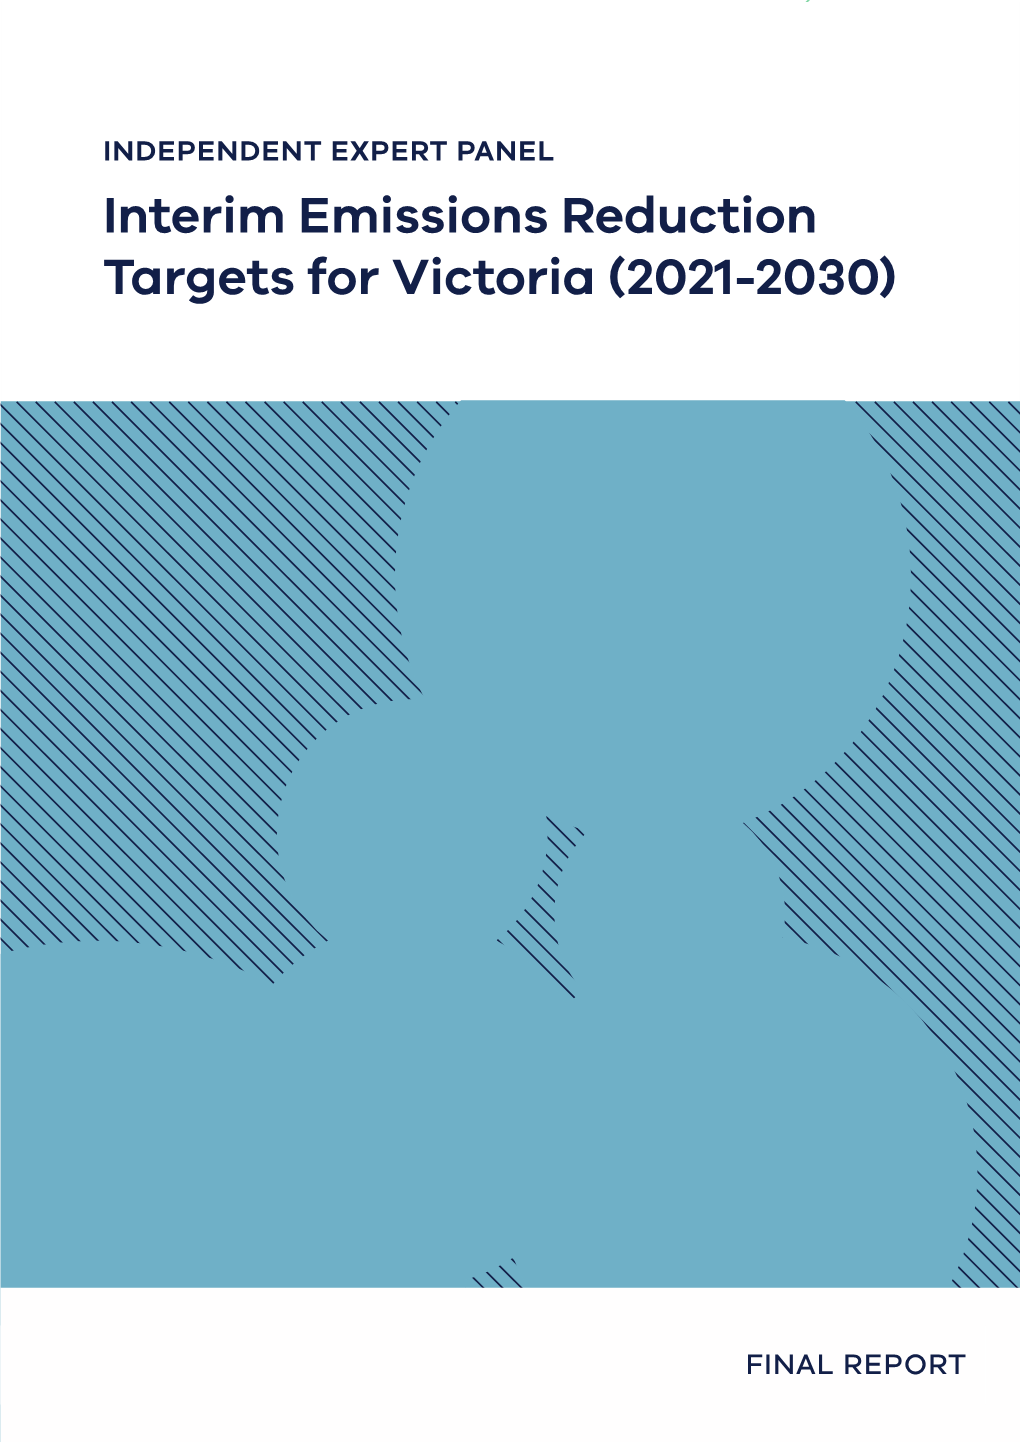 Interim Emissions Reduction Targets for Victoria (2021-2030)